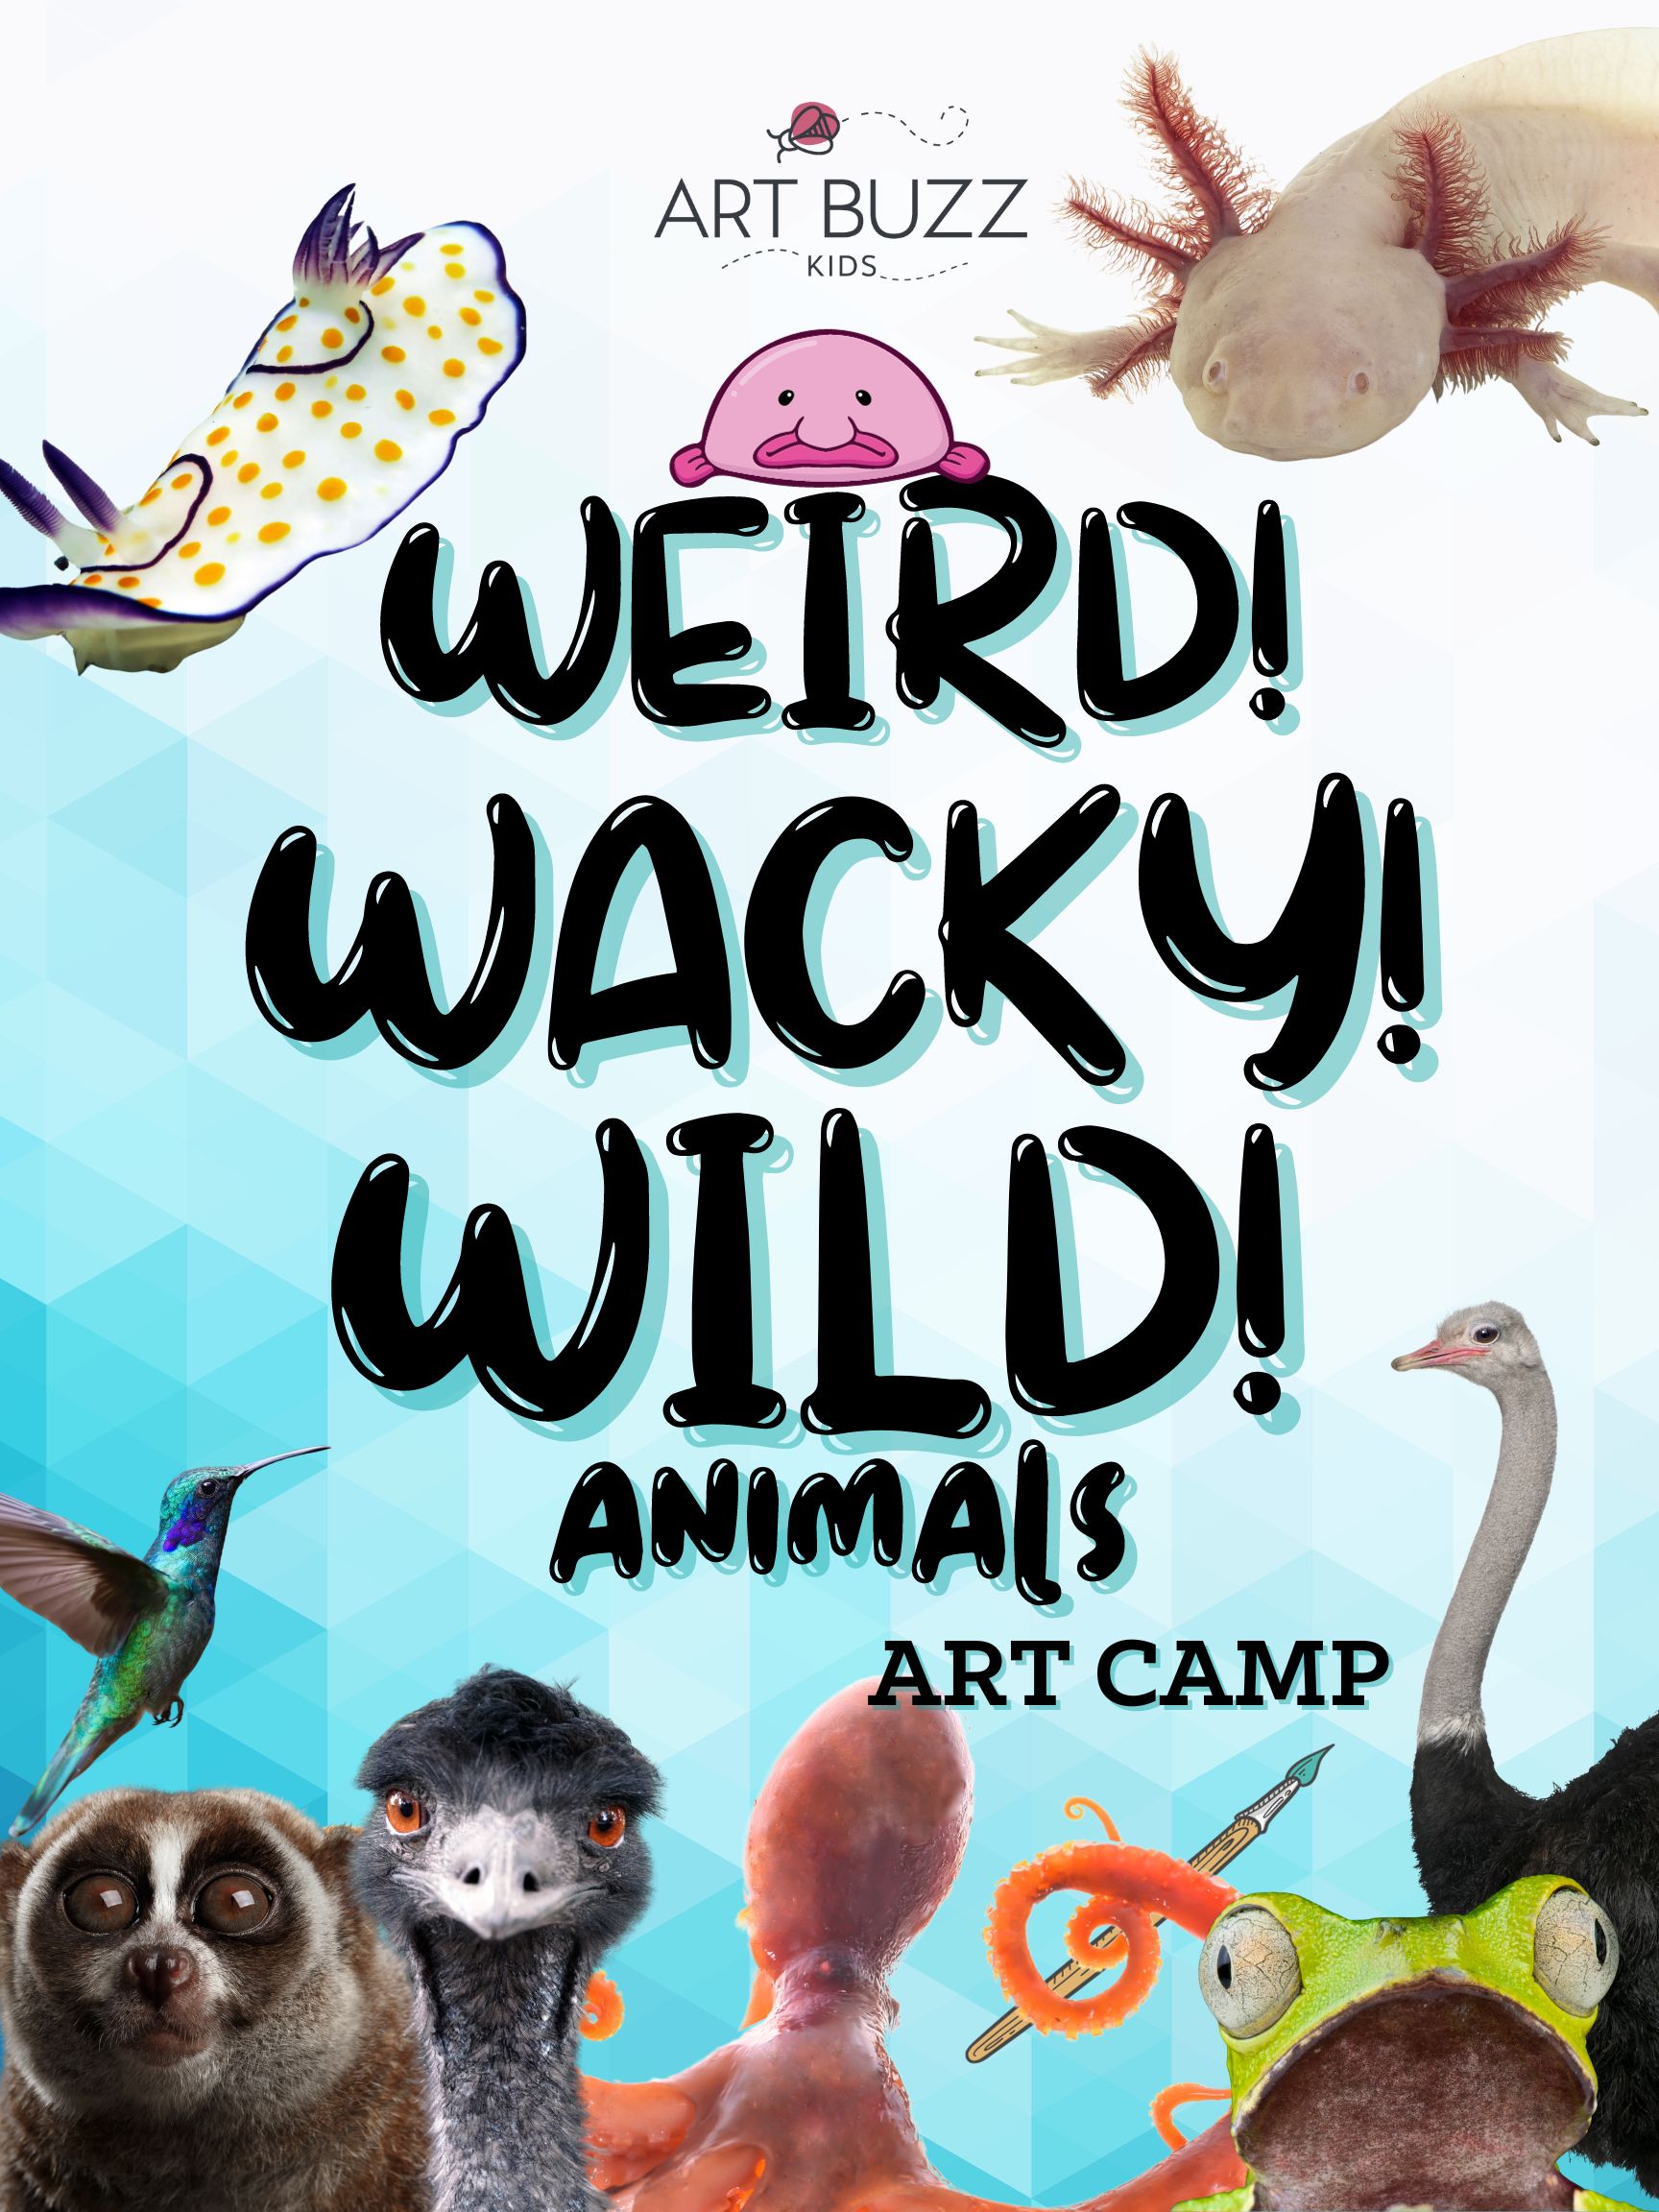 NEW Week Long Summer Kids Art Camp: Weird Wacky Wild Animals! 9AM-1PM. Offered Daily *scroll down to see paintings